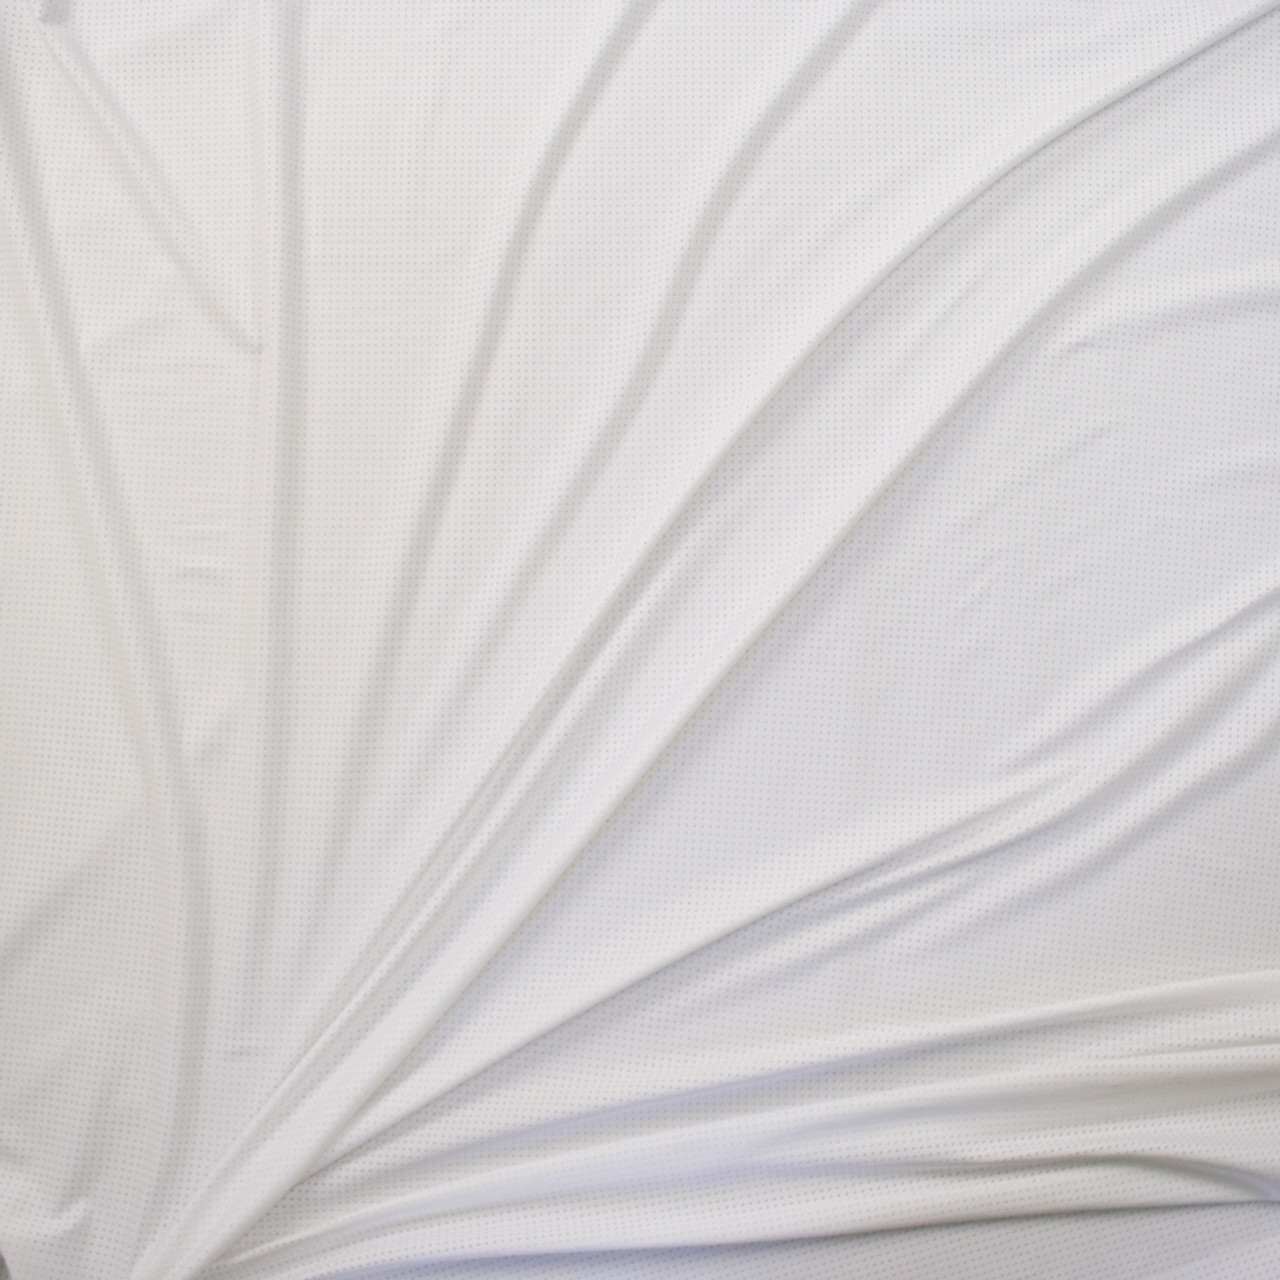 60 Stretch Lining White Semi-Sheer Lightweight Poly/Nylon/Spandex Fabric  by the Yard (D166.20)